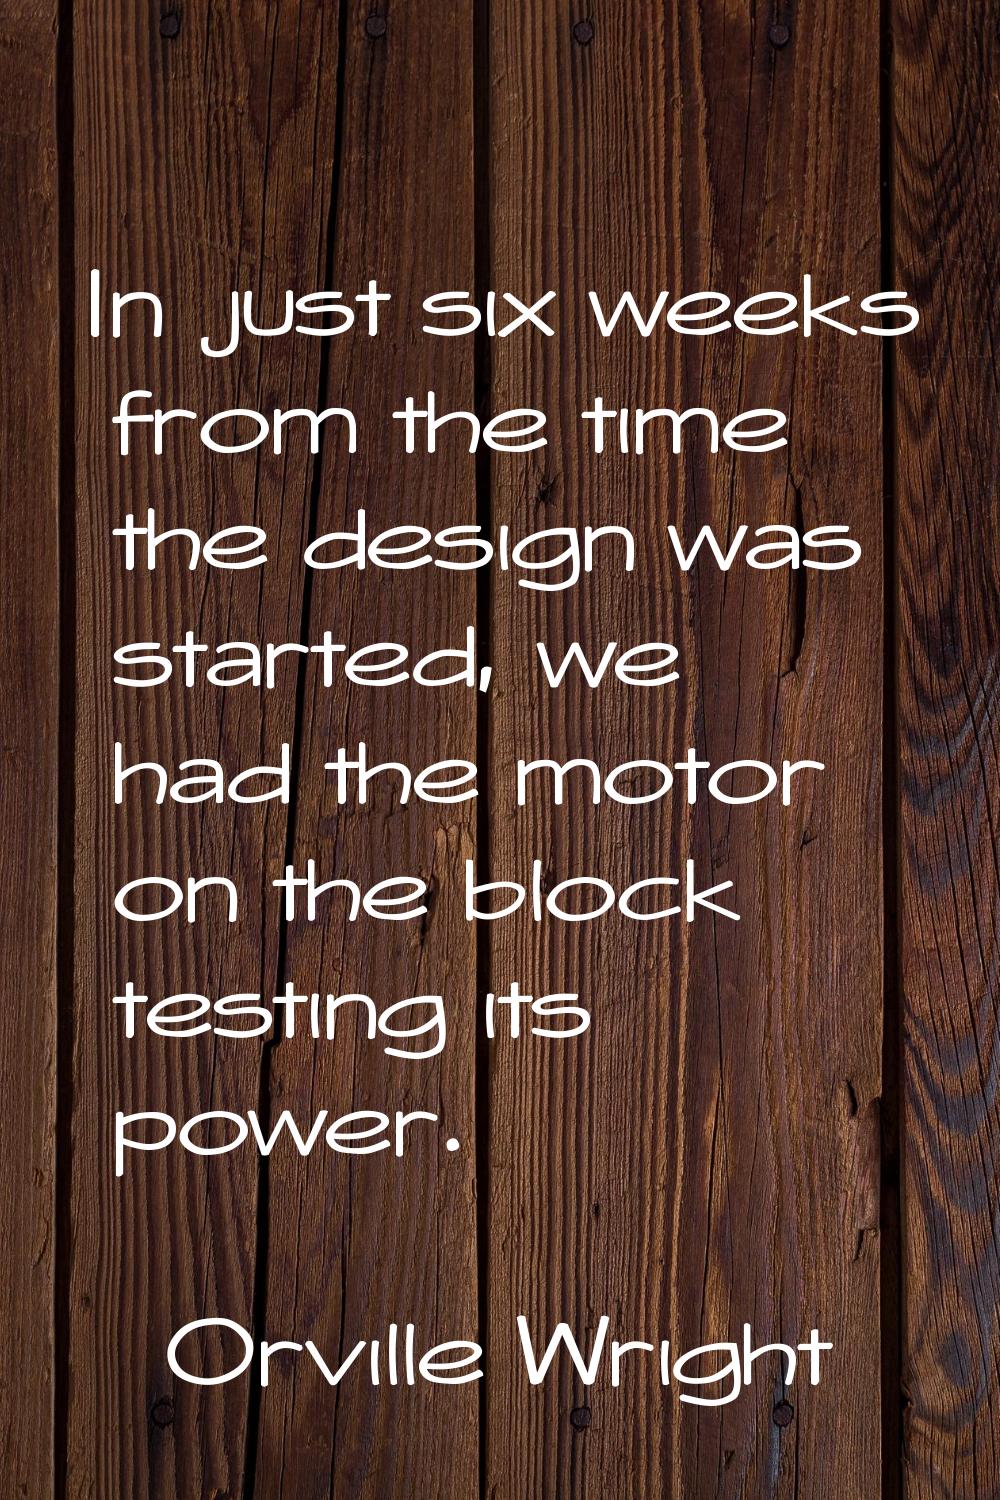 In just six weeks from the time the design was started, we had the motor on the block testing its p